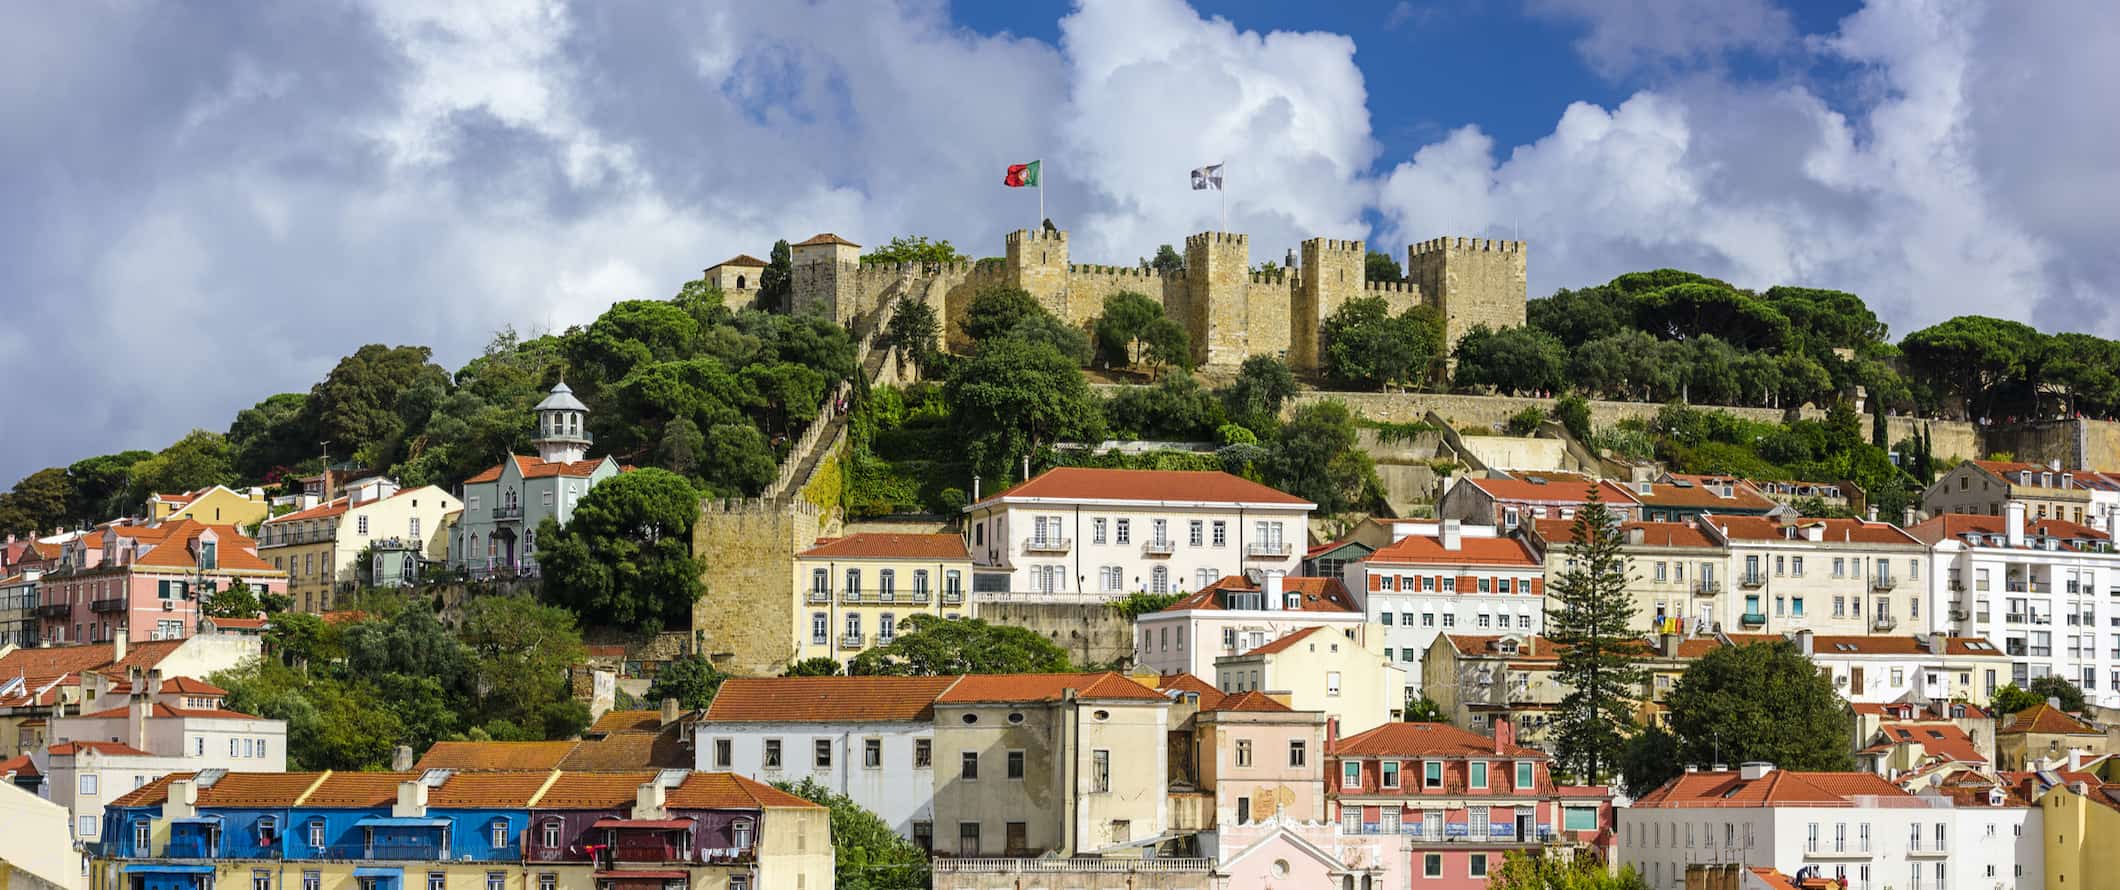 Sao George castle overlooking the colorful city of Lisbon, Portugal